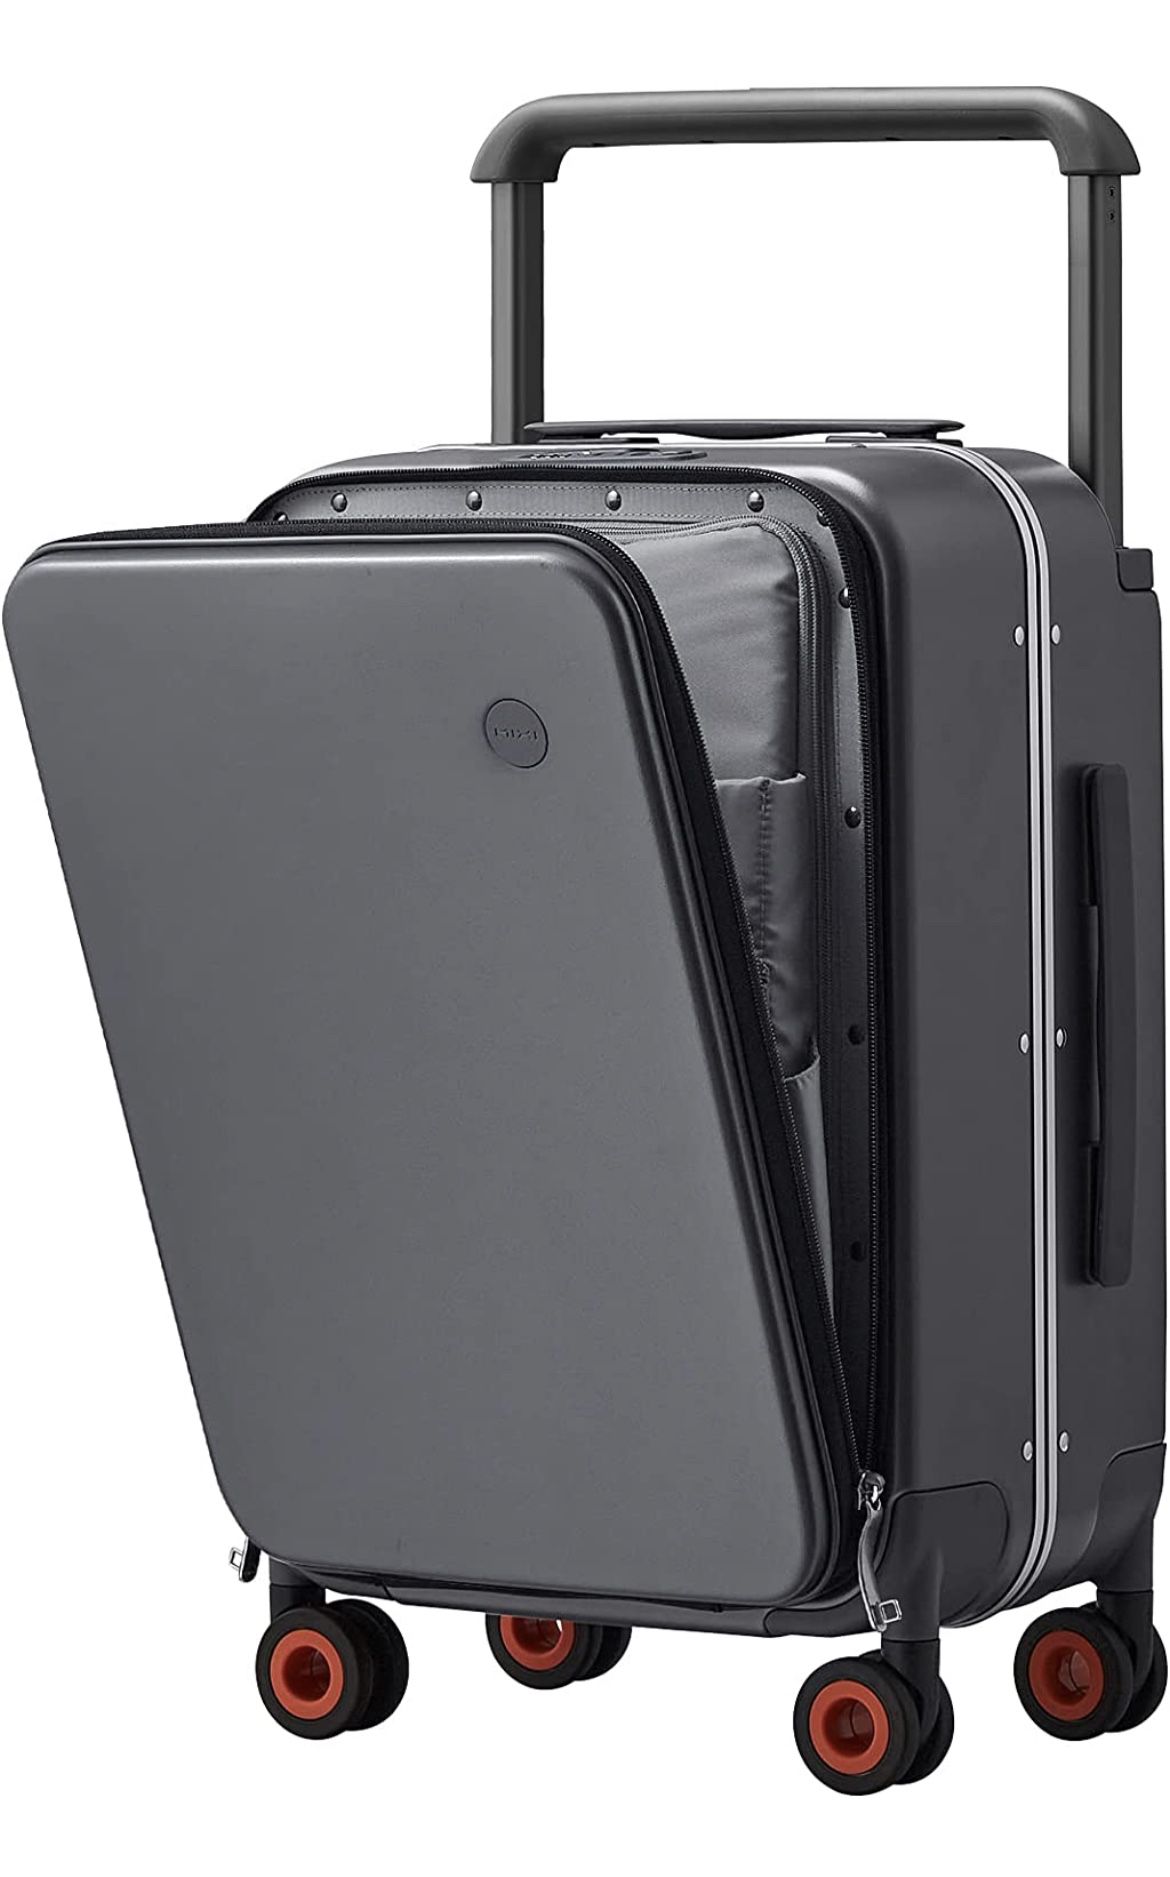 MIXI - Luggage 20’ Carry On 